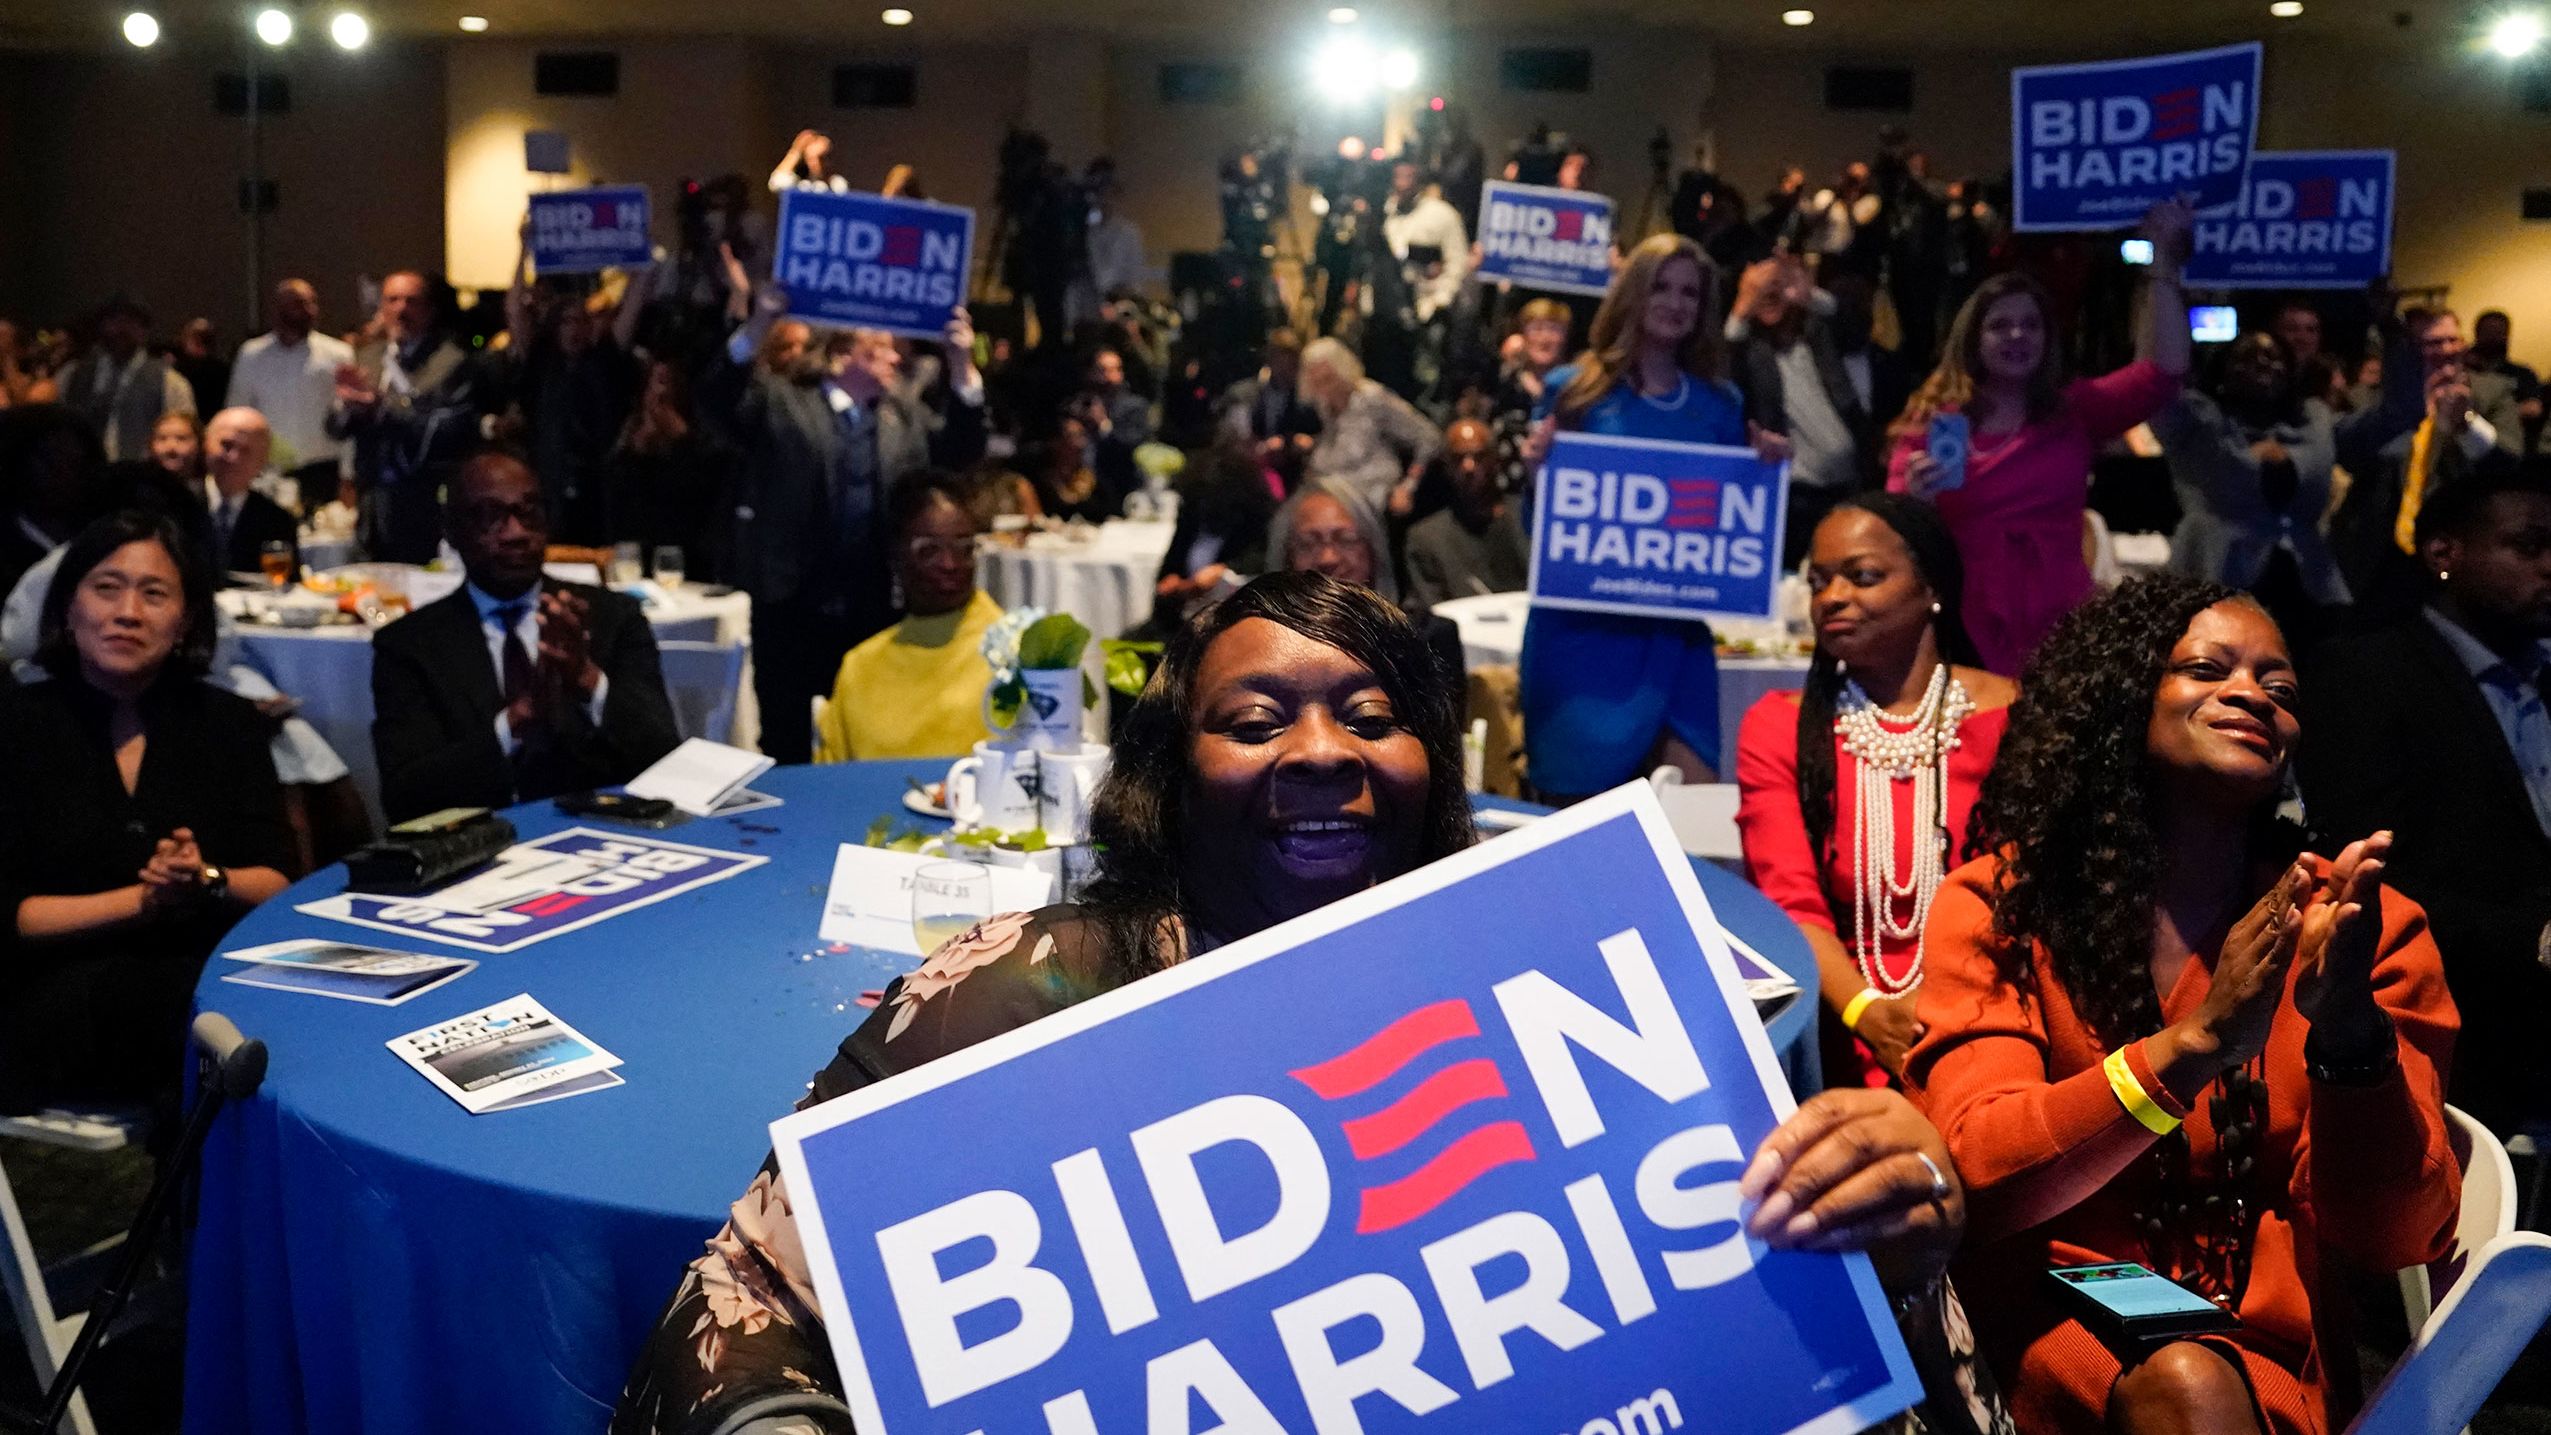 Biden will win South Carolina Democratic primary, earning his first